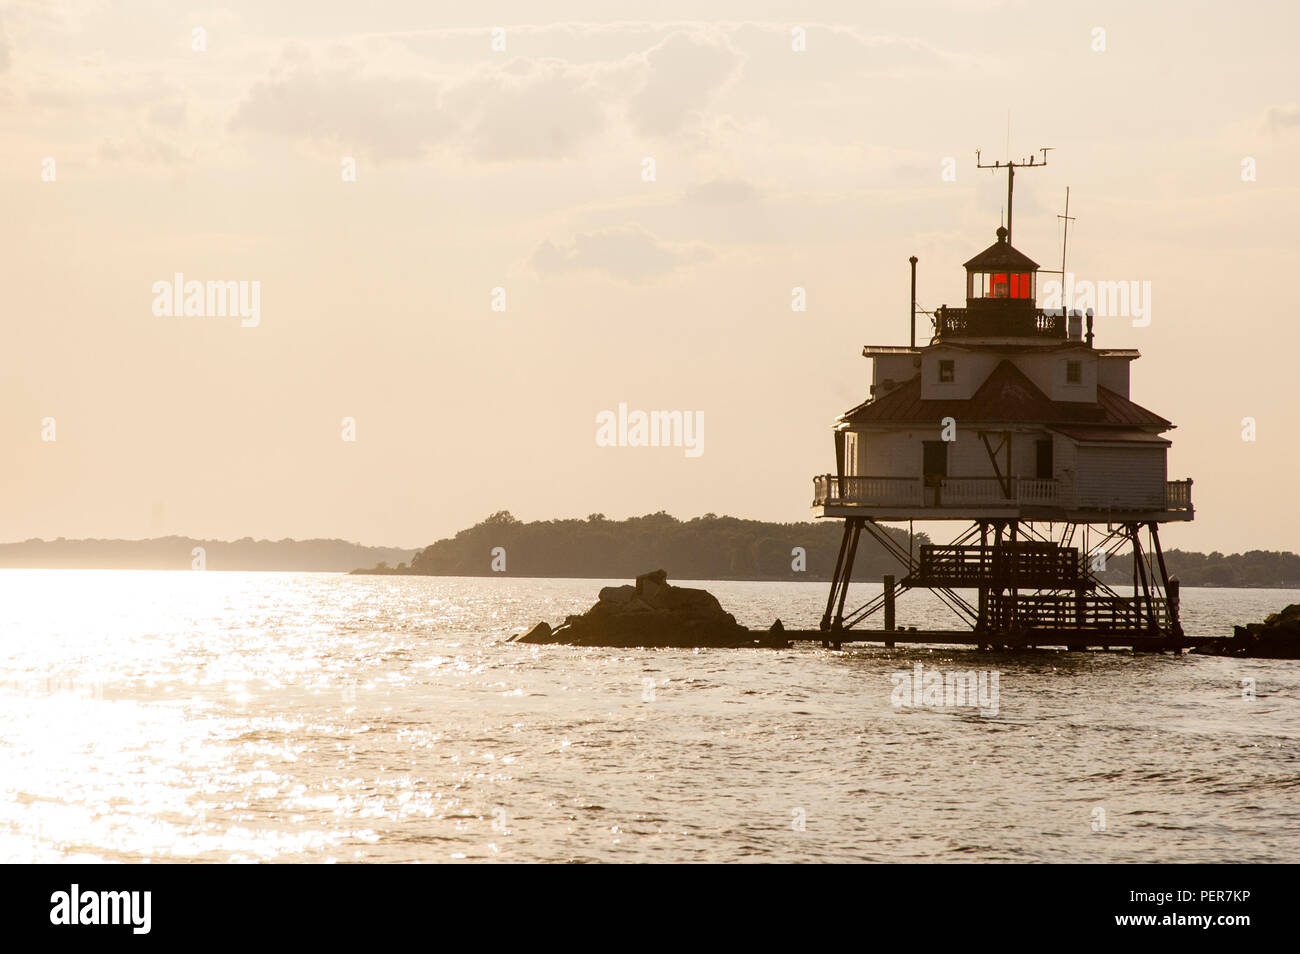 Thomas Point Shoal Lighthouse in der Chesapeake Bay in Maryland, ein sechseckiges Holzhaus. Stockfoto